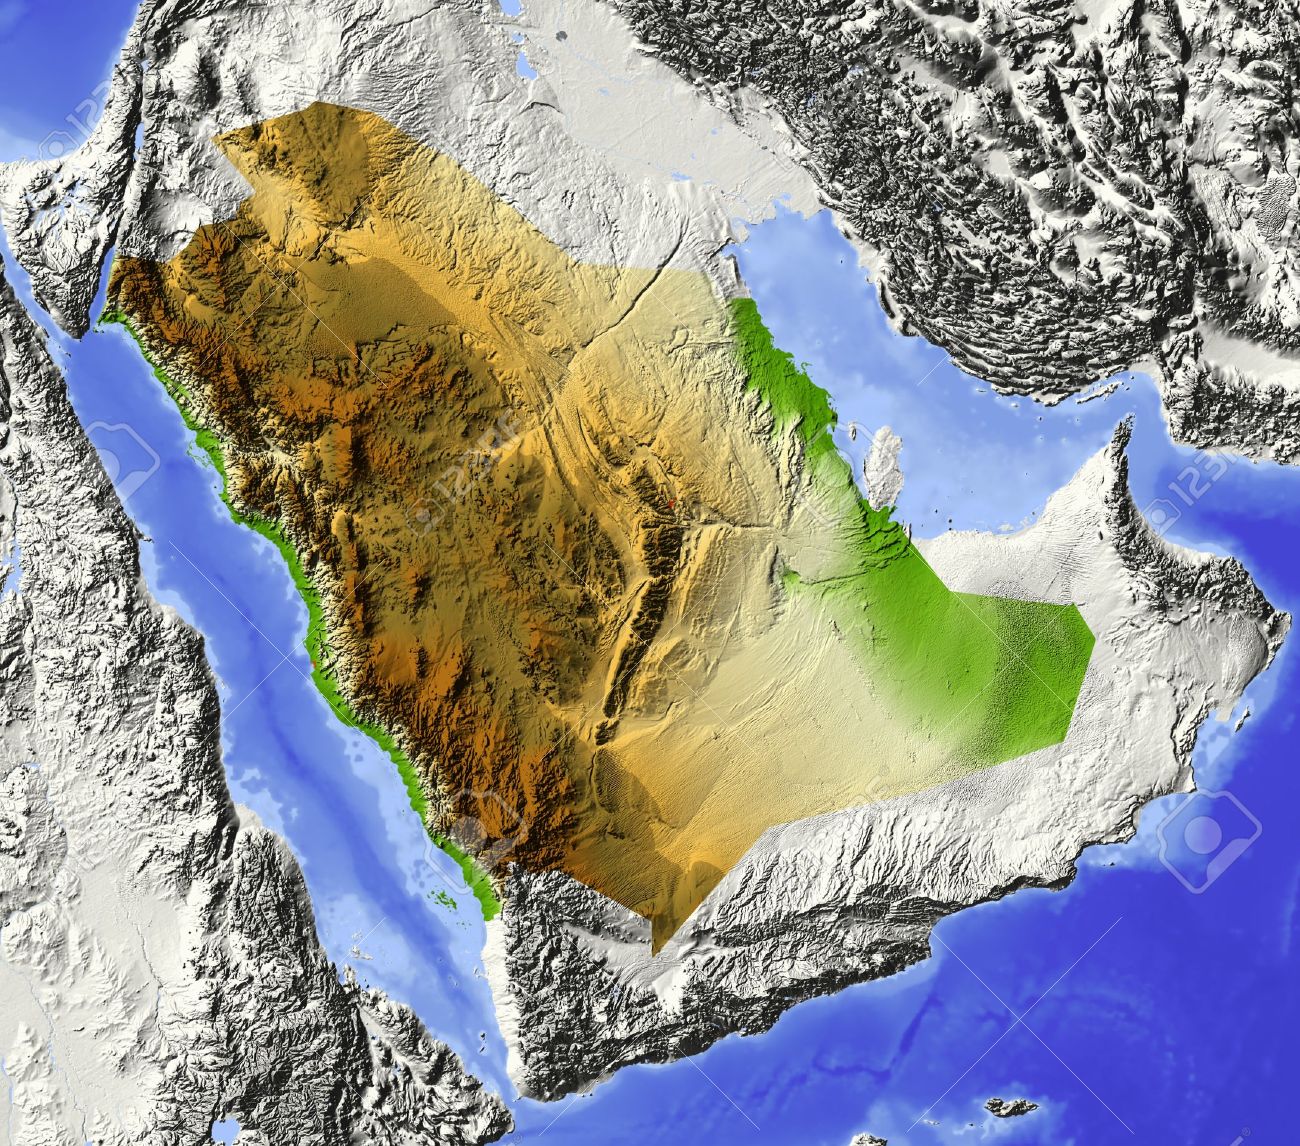 10962366-saudi-arabia-shaded-relief-map-surrounding-territory-greyed-out-colored-according-to-elevation-inclu.jpg